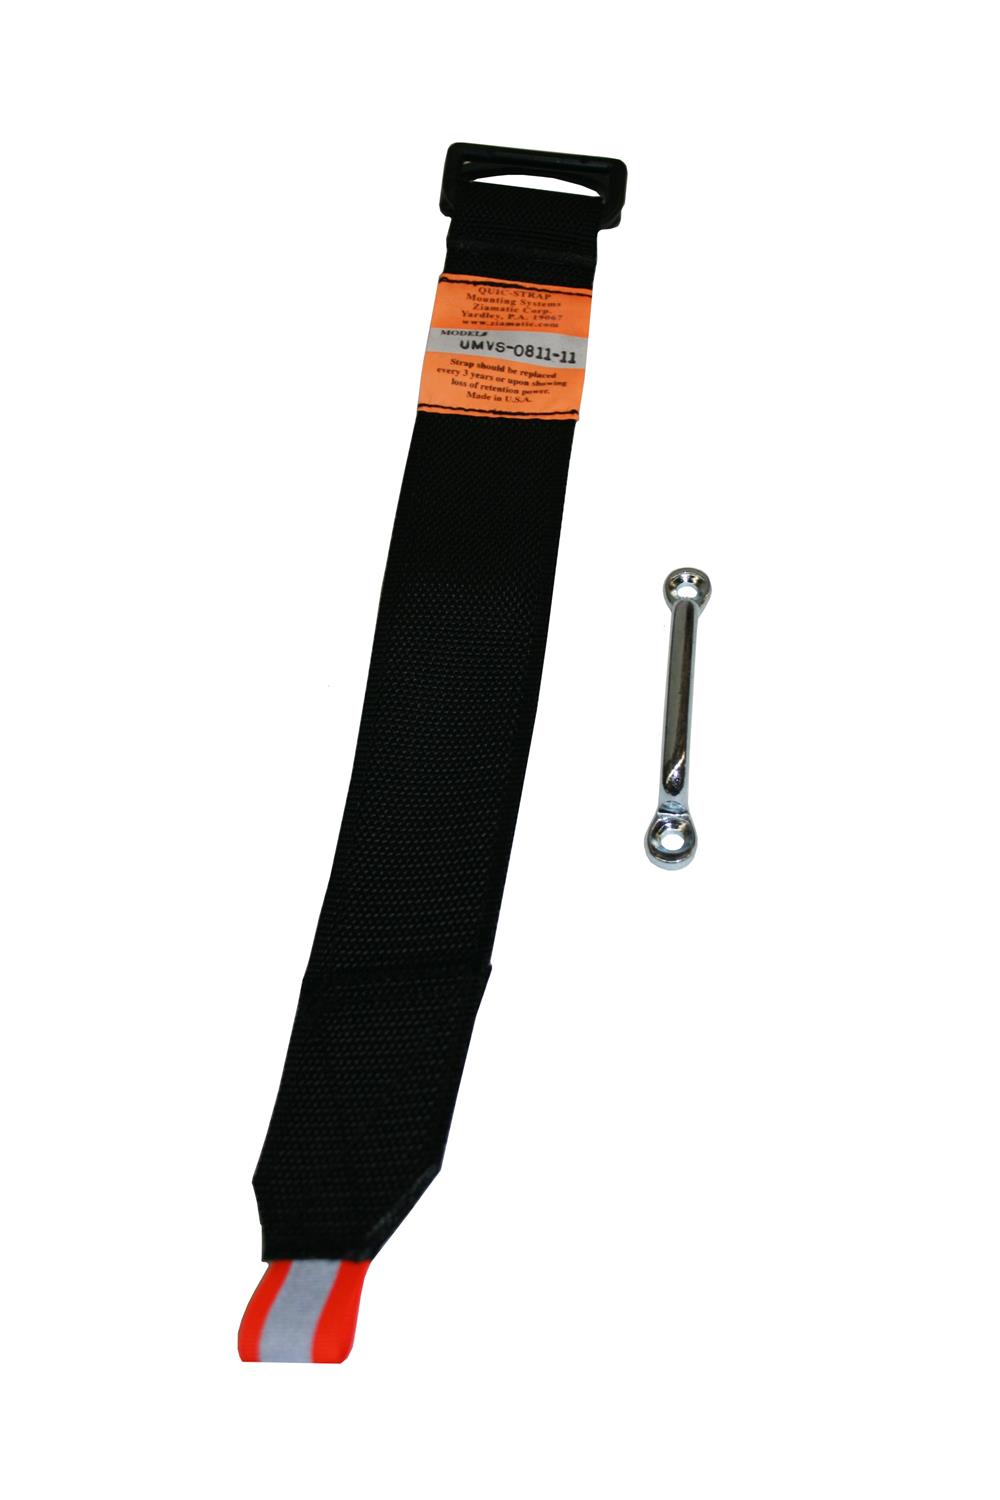 5" to 6-1/2" Variable Strap